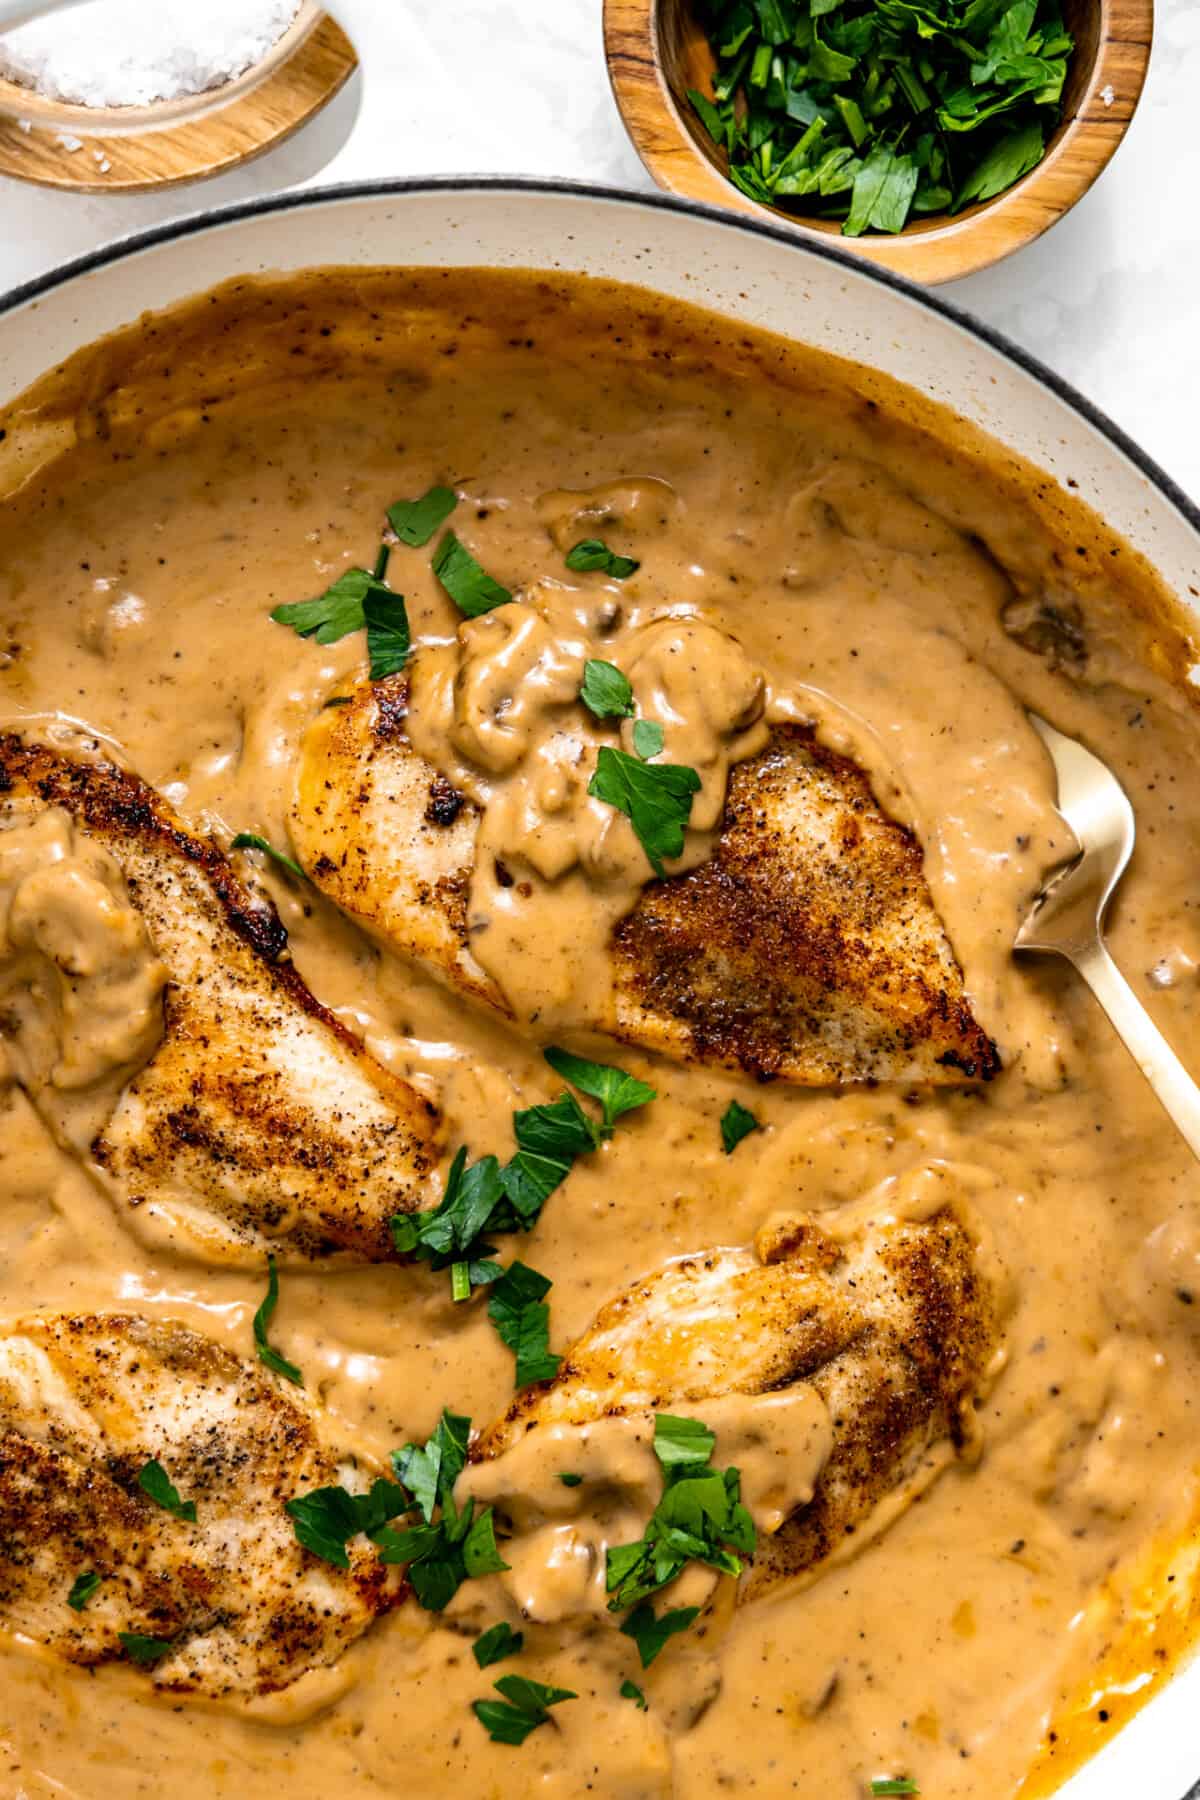 Chicken Breasts smothered in a creamy mushroom sauce topped with herbs being served with a spoon.